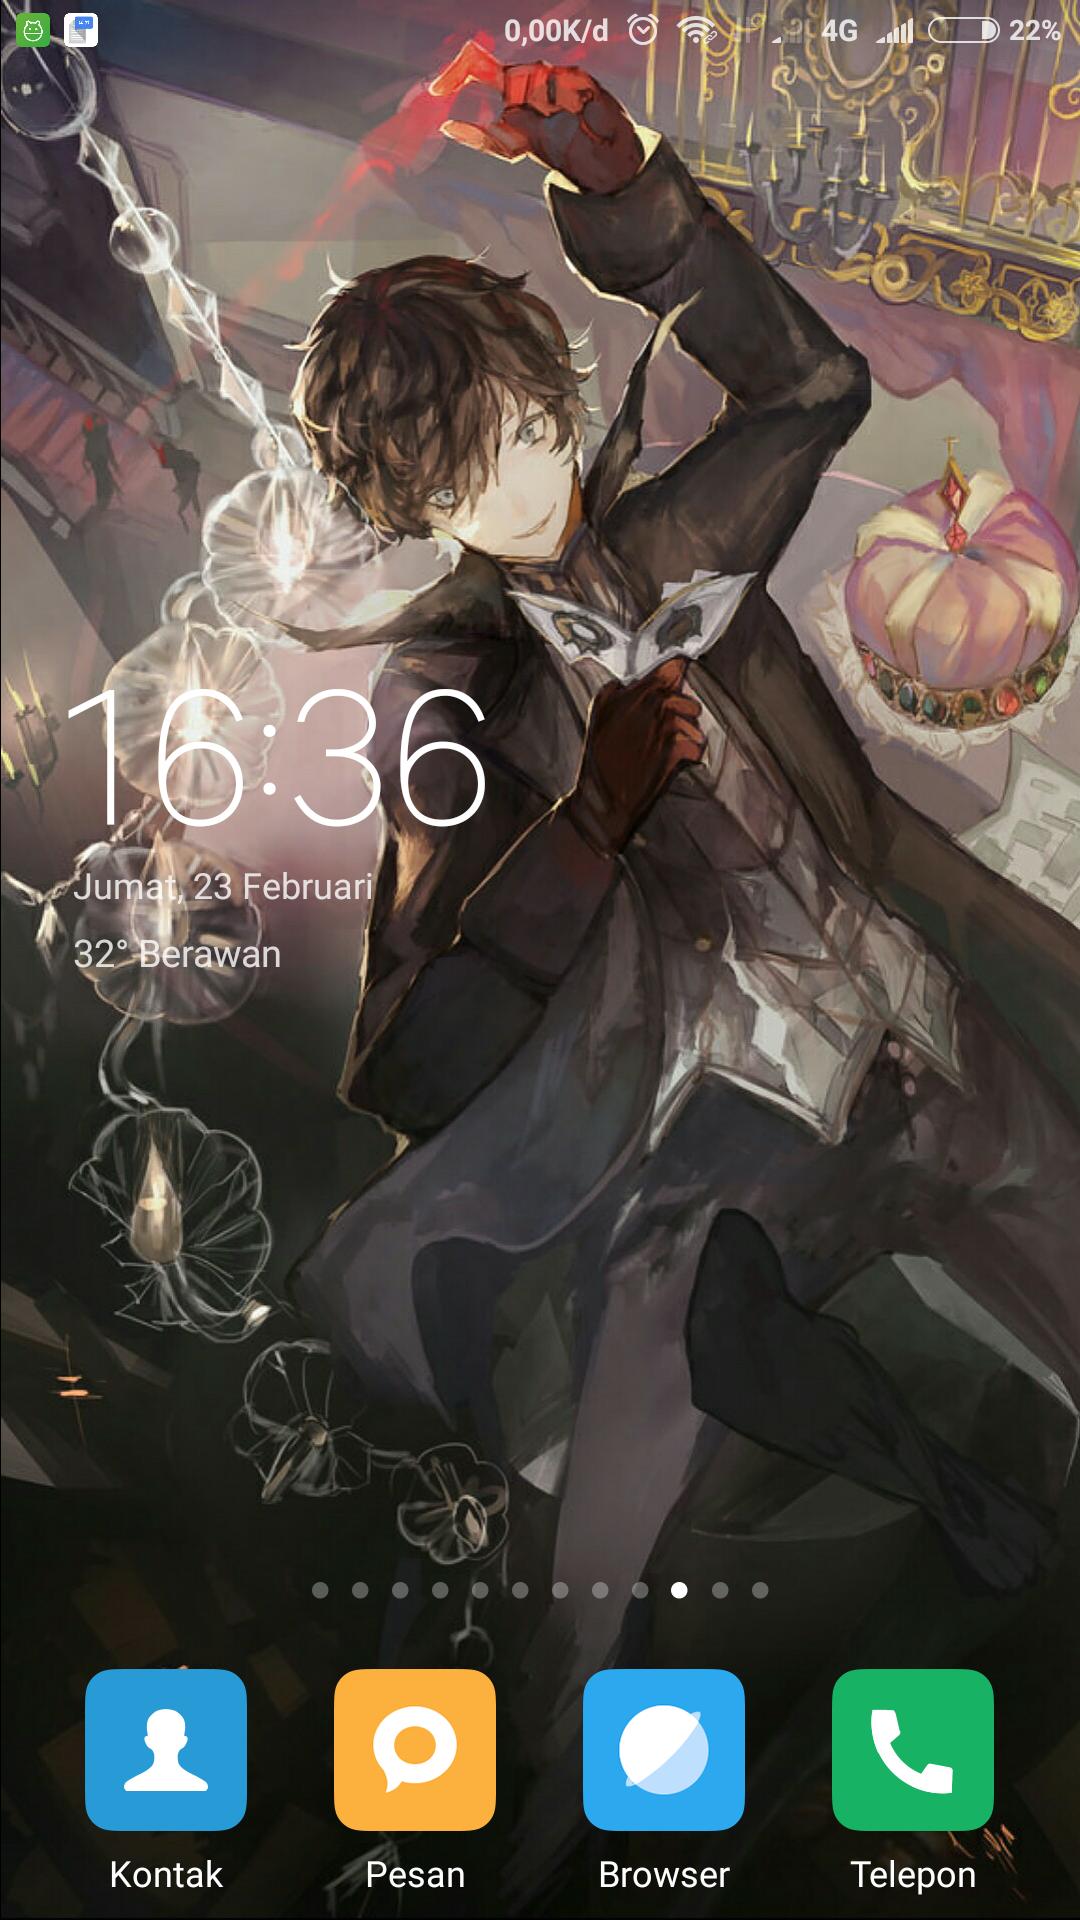 Persona 5 Fansart The Animation Wallpaper For Android Apk Download